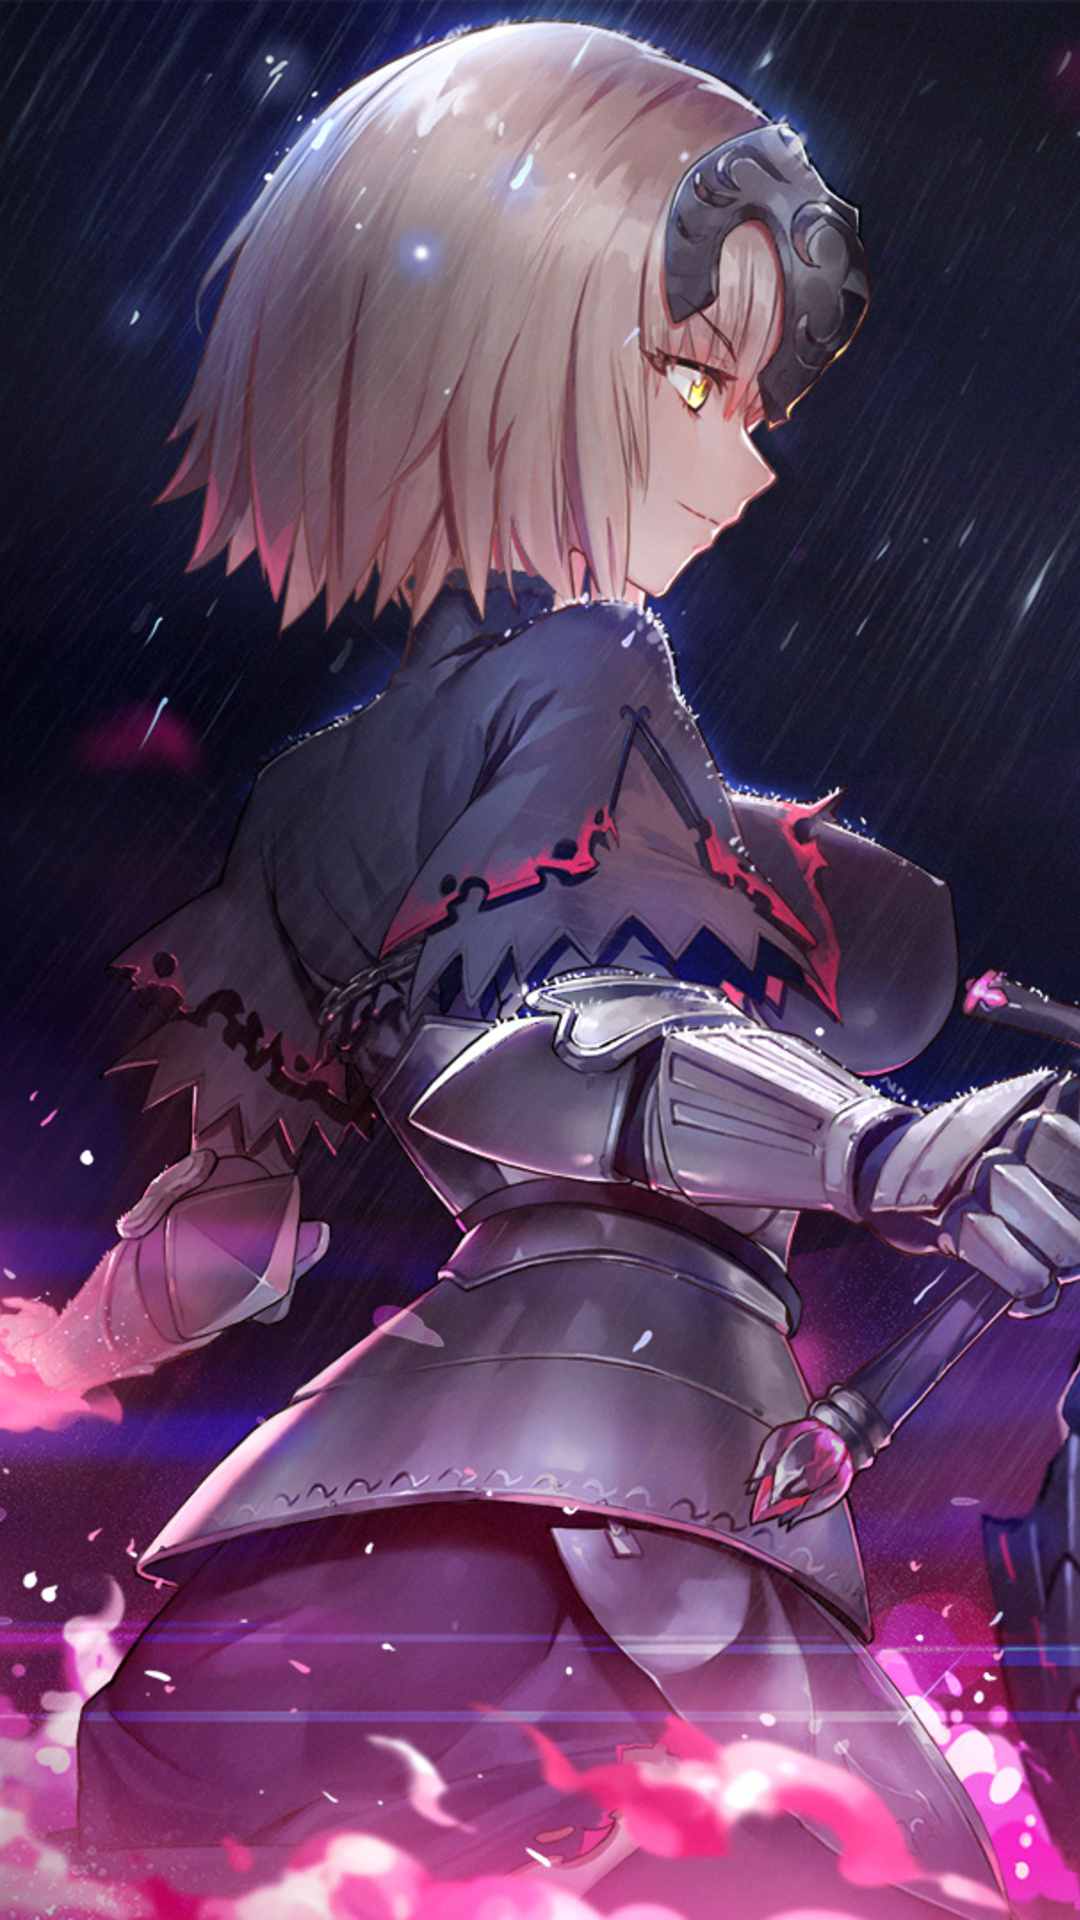 1080x1920 Fate Grand Order Anime Iphone 7,6s,6 Plus, Pixel xl ,One Plus